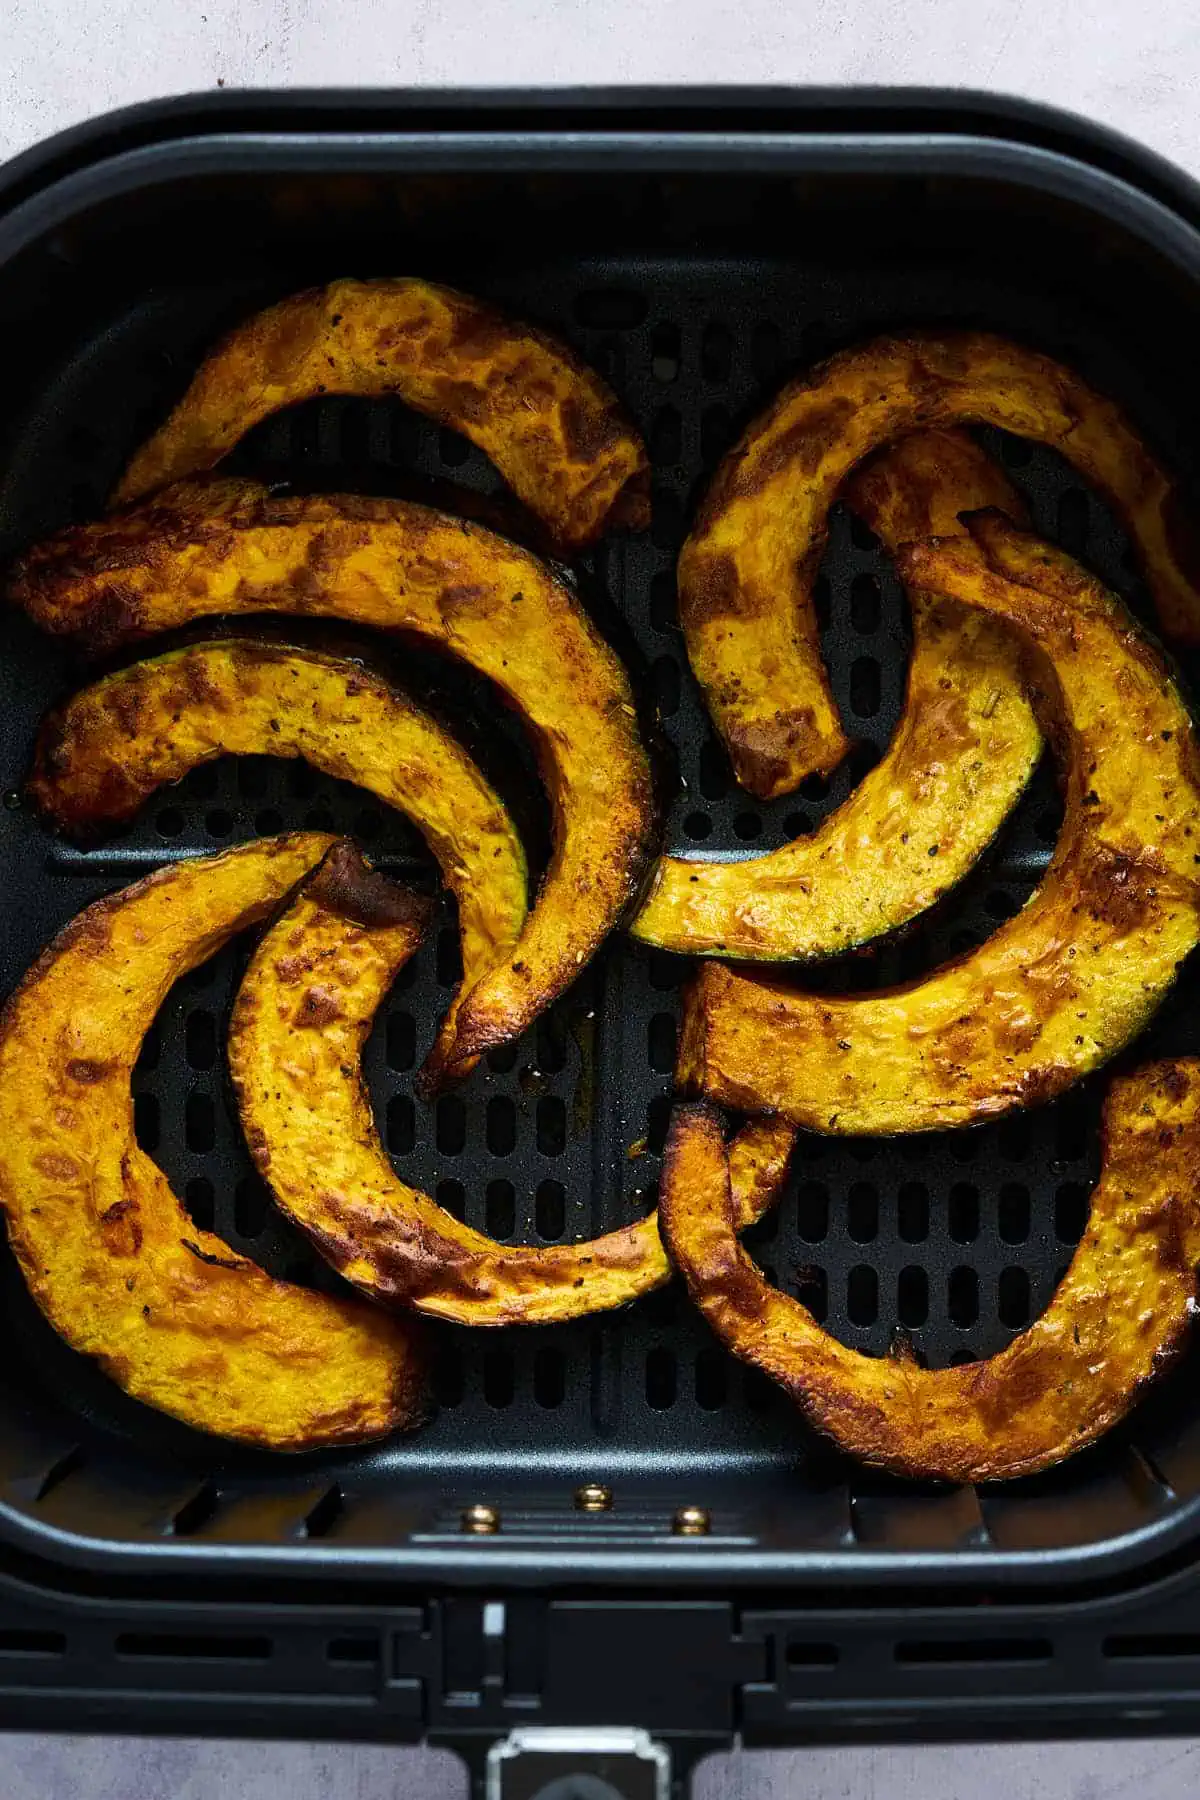 Air fryer buttercup squash in the air fryer basket after cooking.